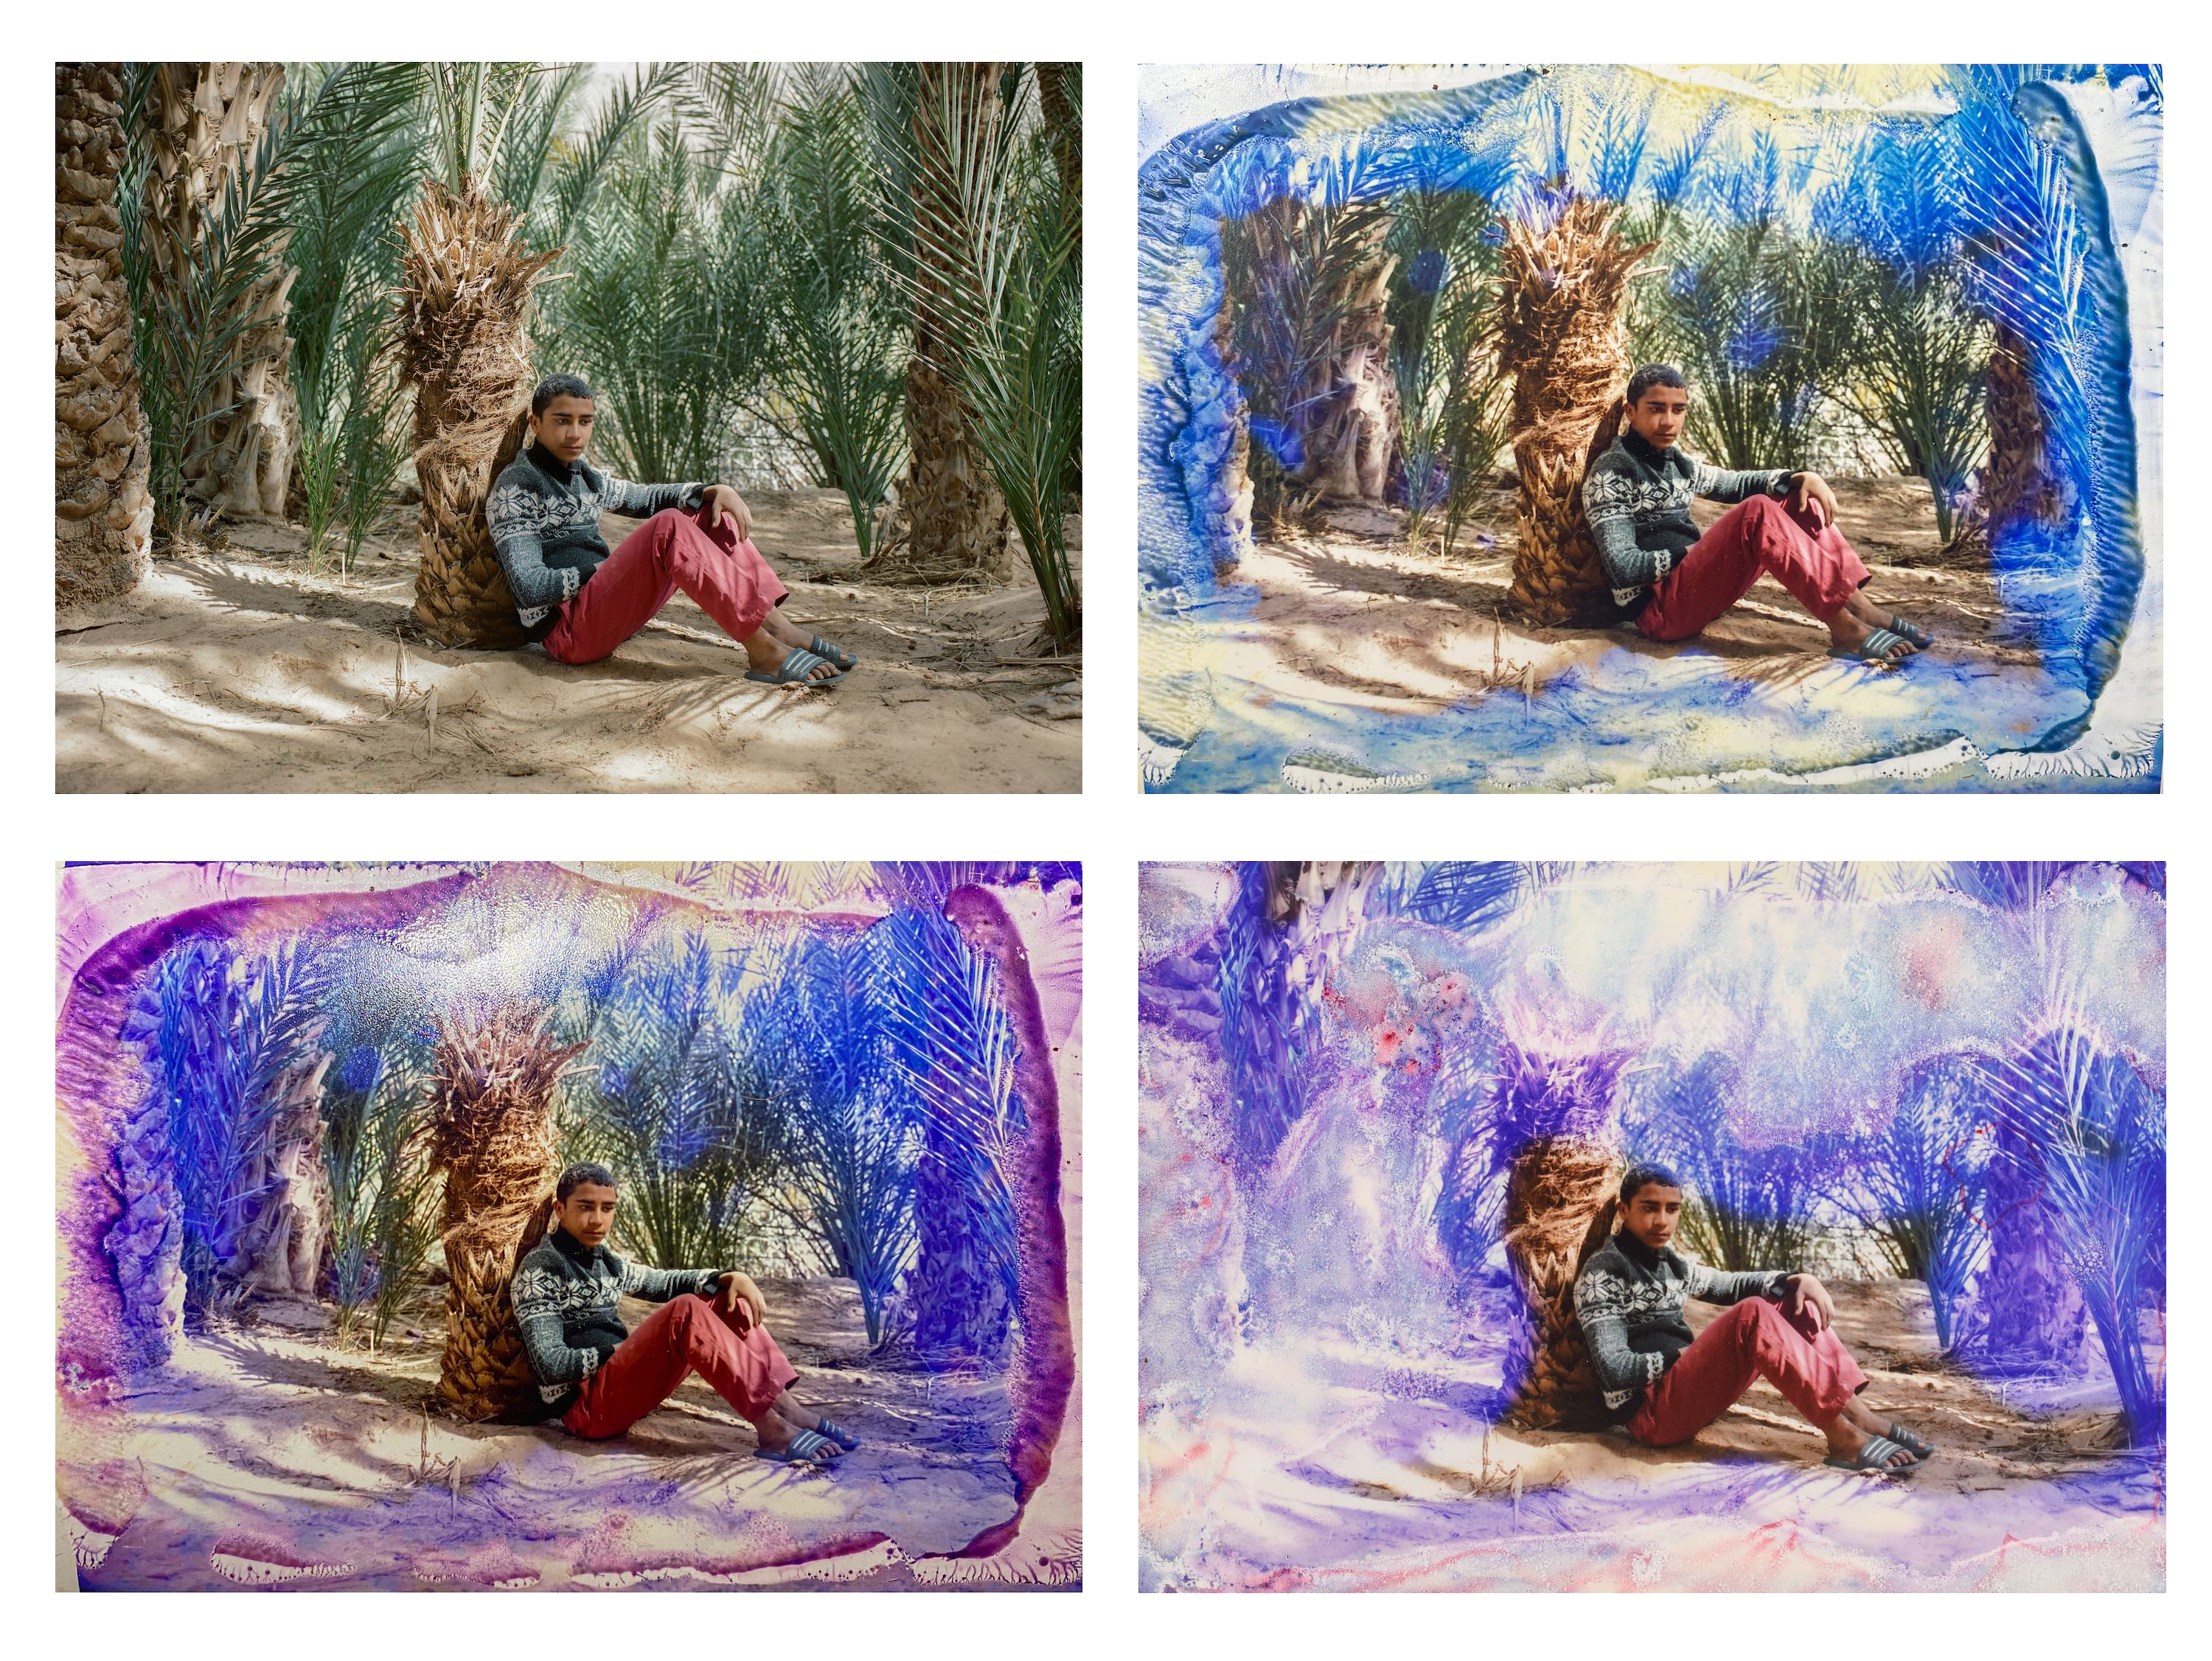 Four images of a boy sitting under a palm tree. Images appear to have been manipulated with acid, creating a blue film. Photos by Seif Kousmate